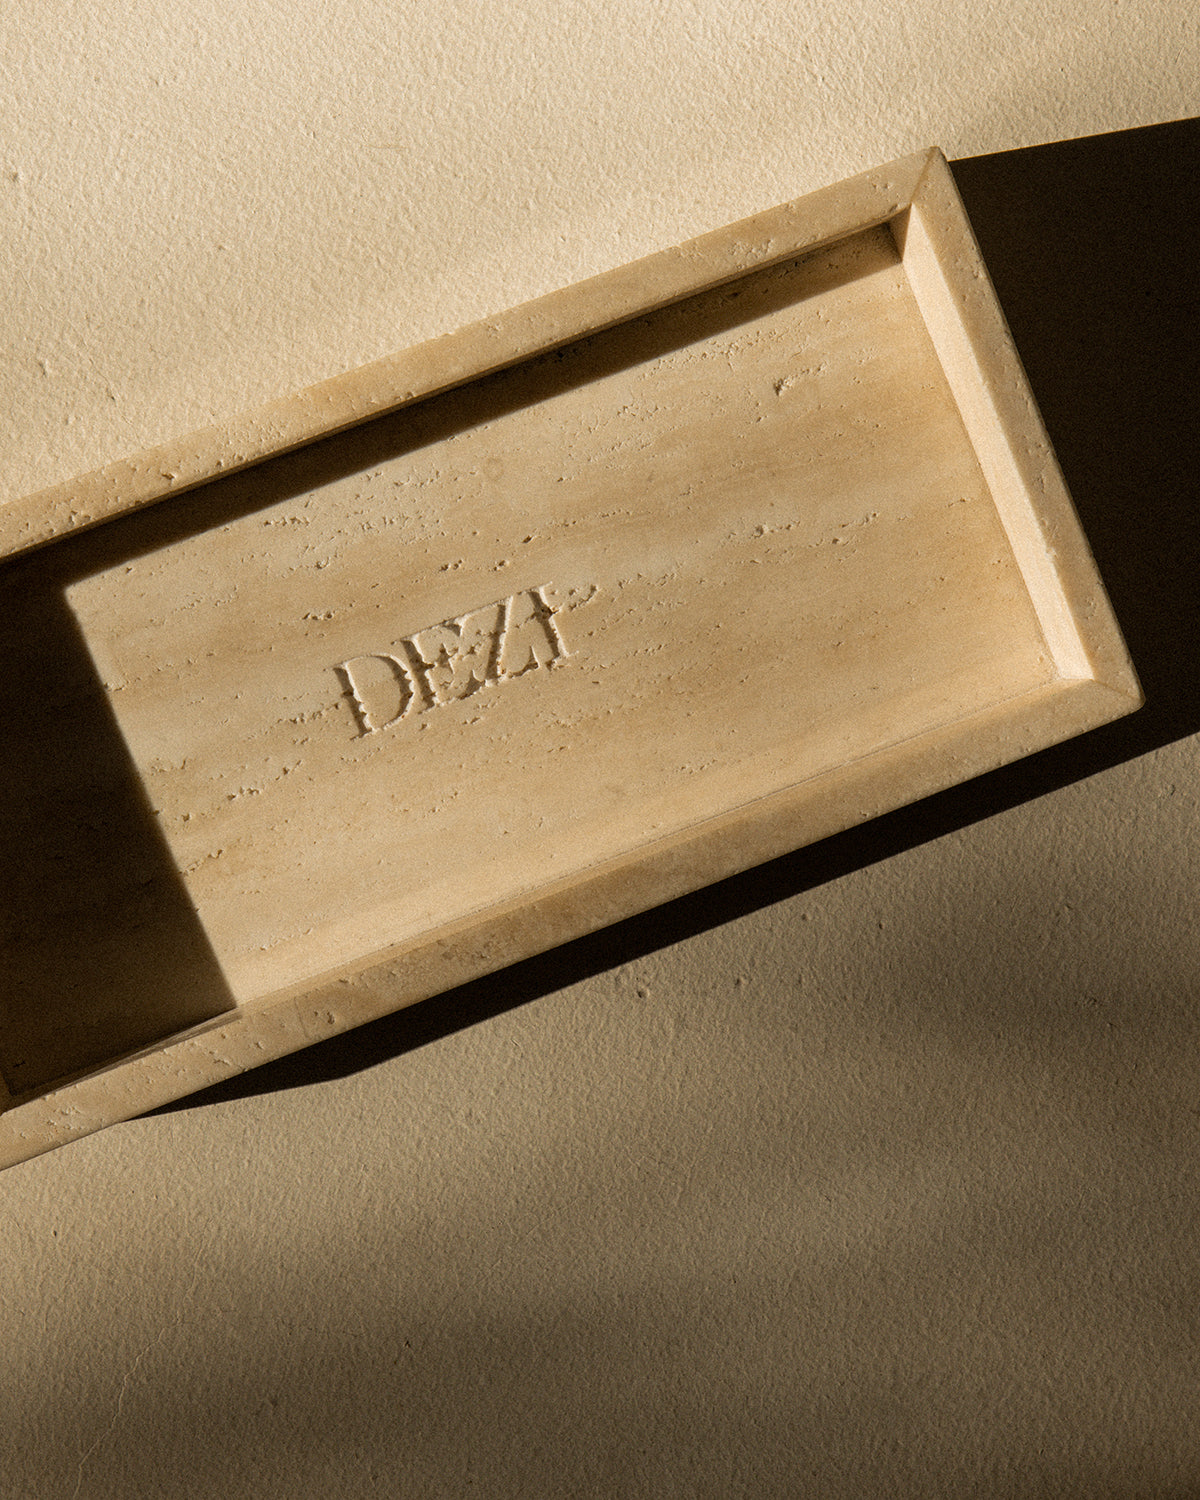 This shows a travertine stone tray with the DEZI logo carved into it. Sunlight is shining on the tray, casting beautiful shadows. 